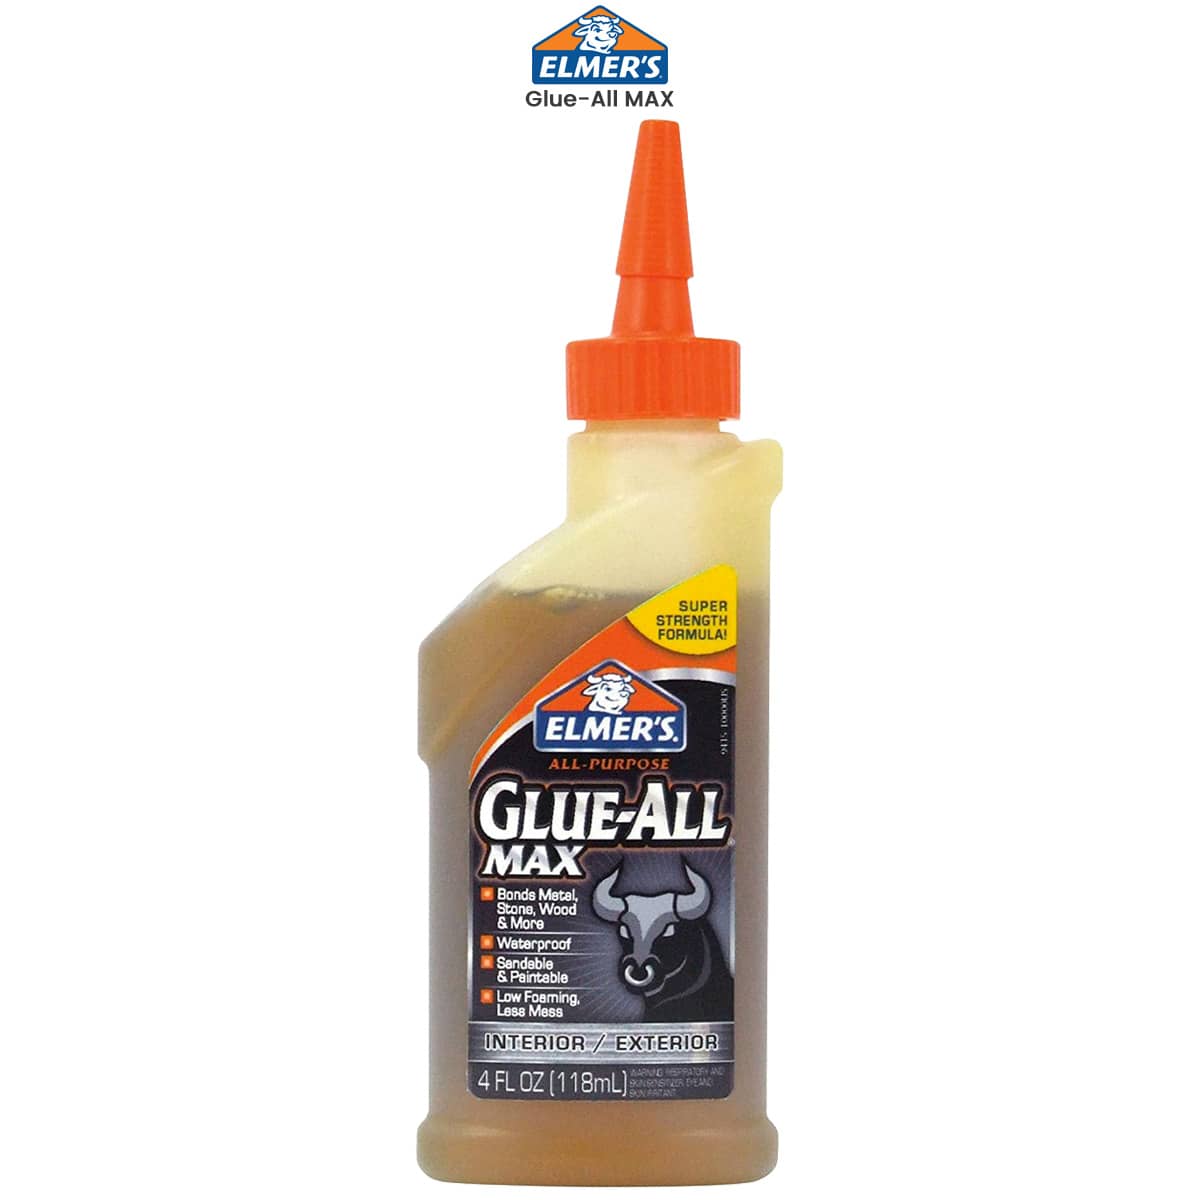 Elmer's Glue-All Multi-Purpose Liquid Glue, Extra Strong, Make Slime and  Bond Materials Like Paper, Fabric, Wood, Ceramics, Leather, and More 4 Oz